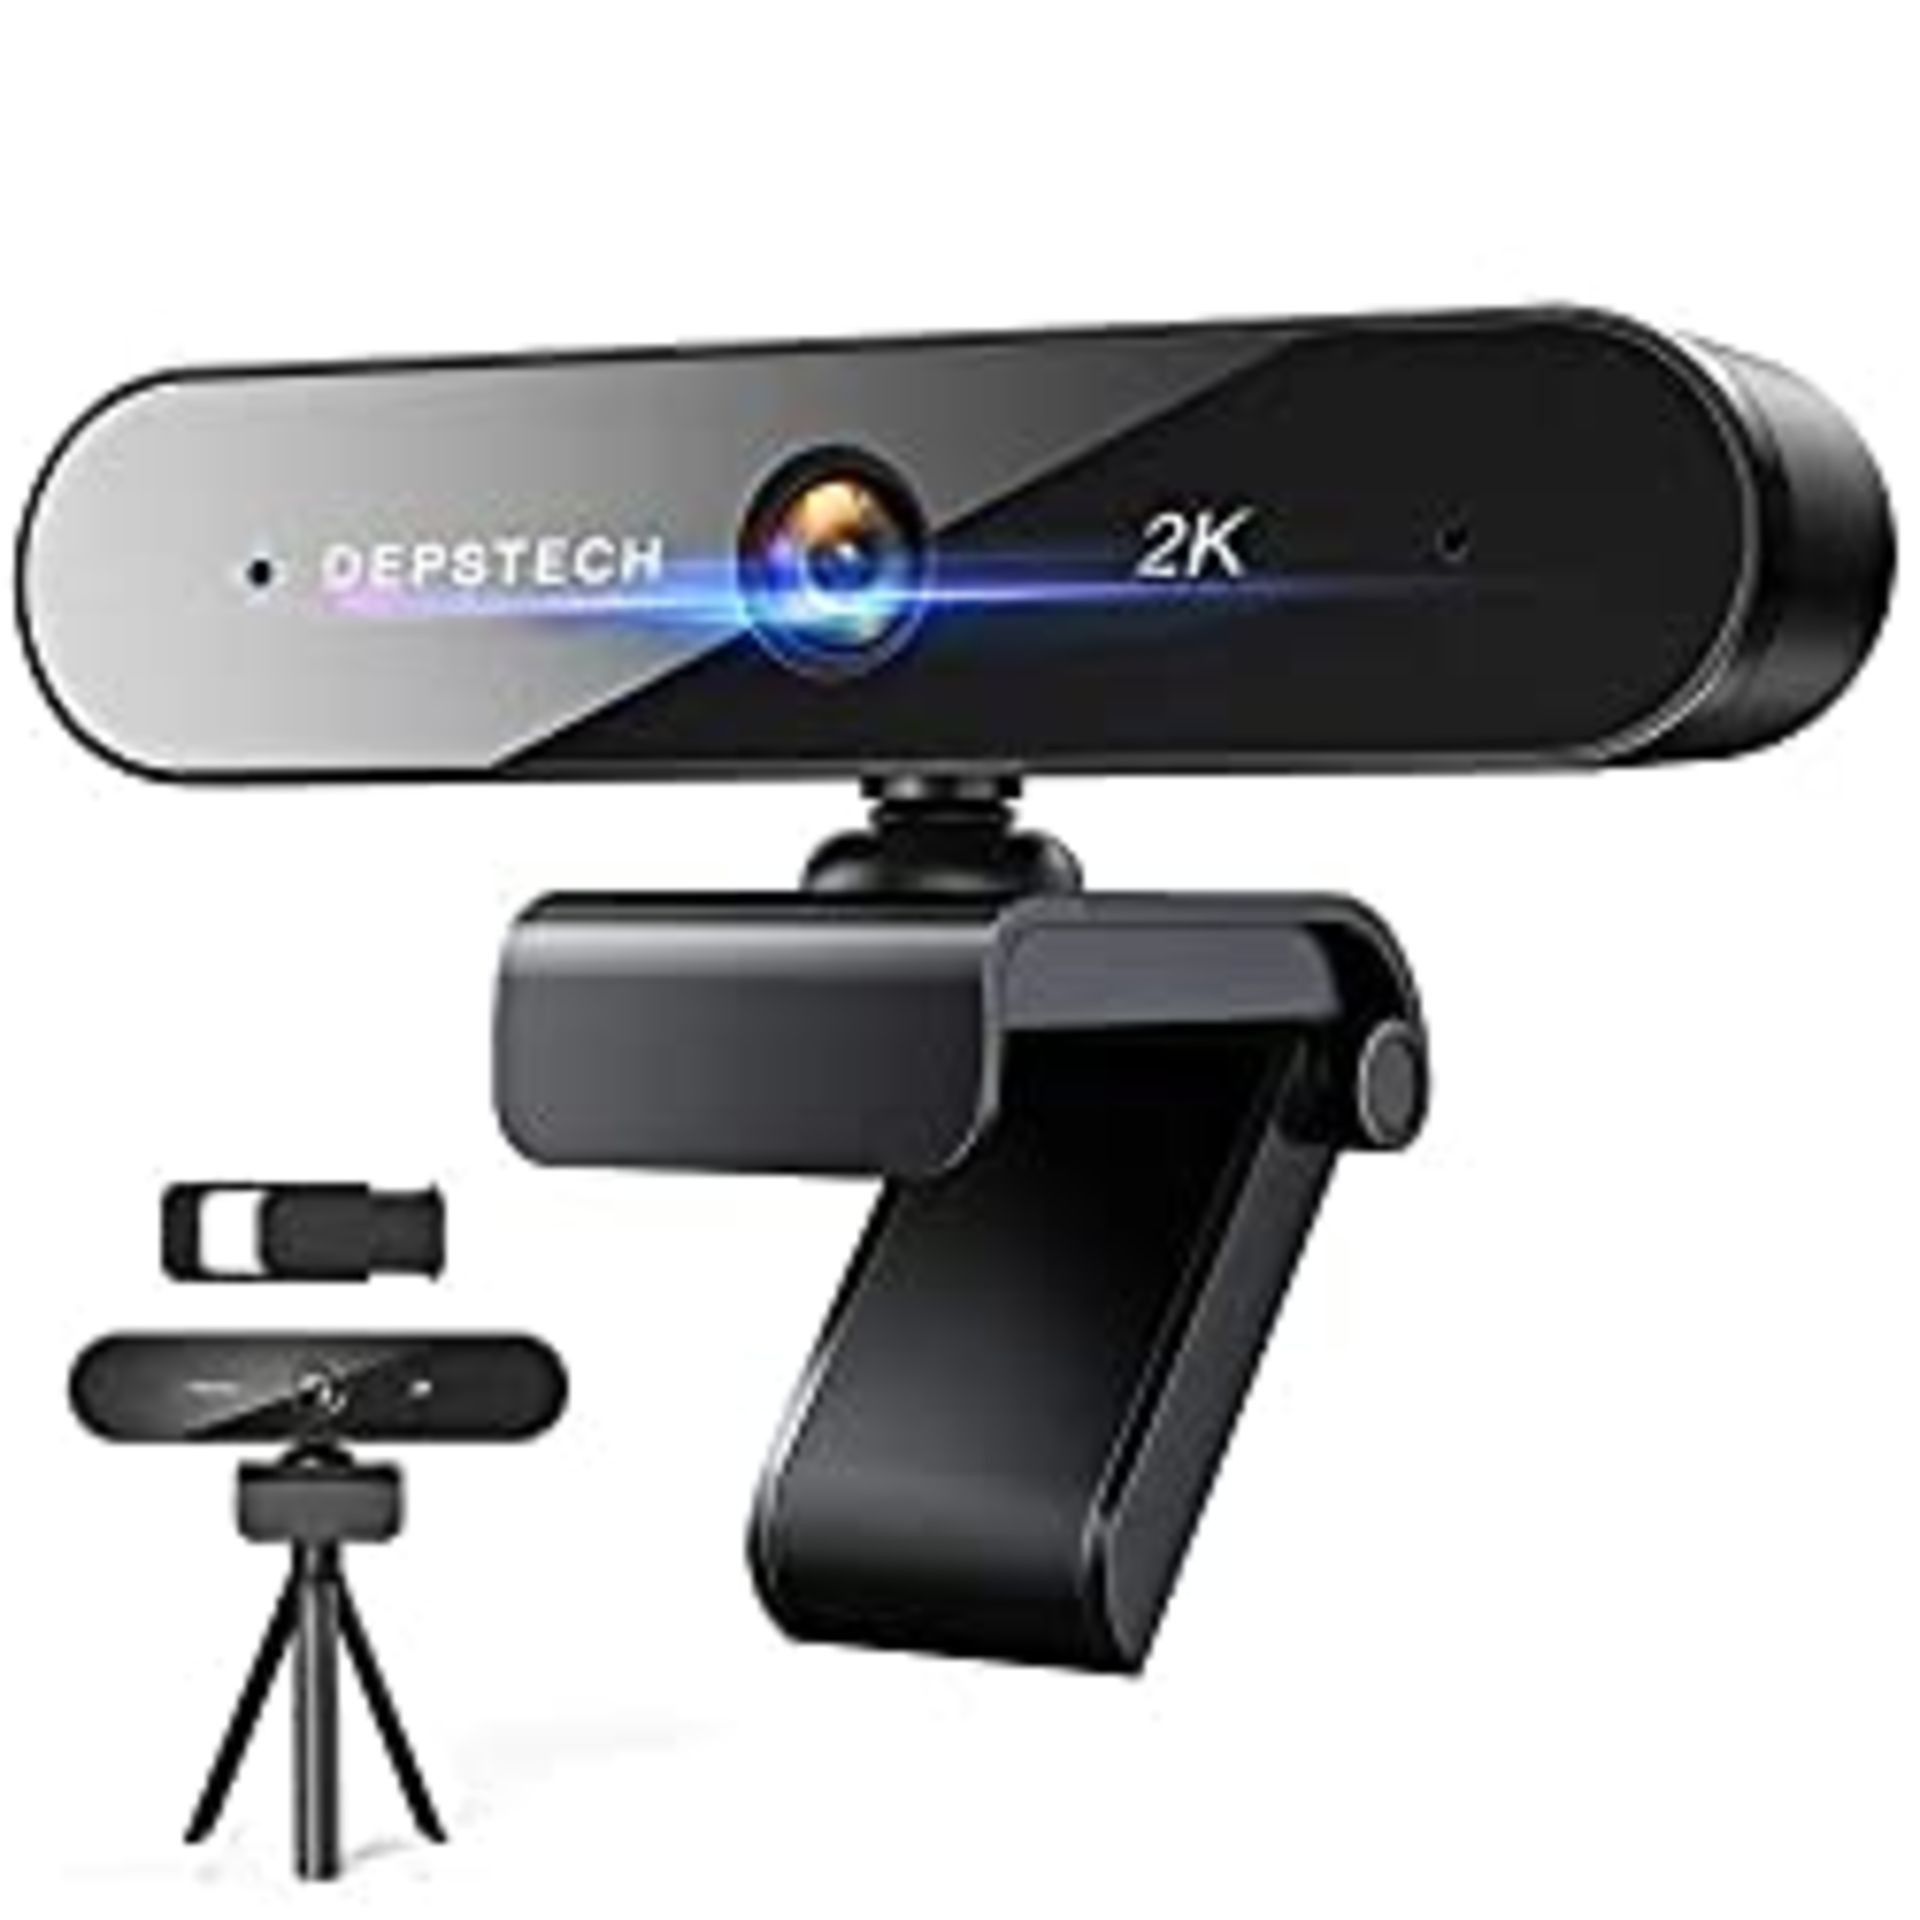 RRP £25.99 DEPSTECH Webcam with Microphone